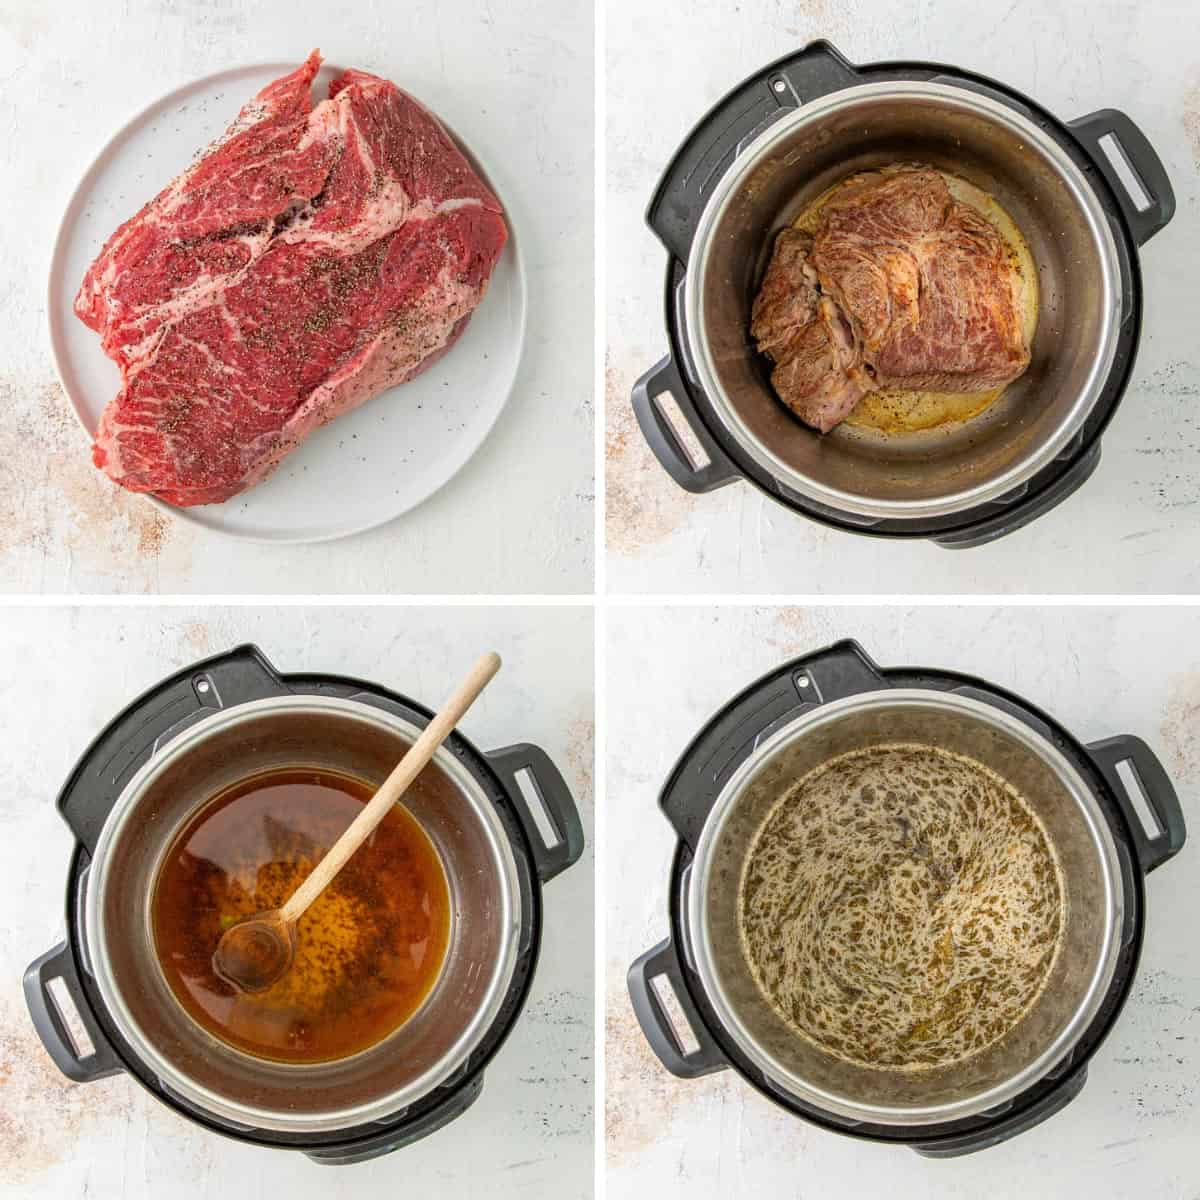 Step-by-step photos showing how to make French dip sandwiches in the instant pot.